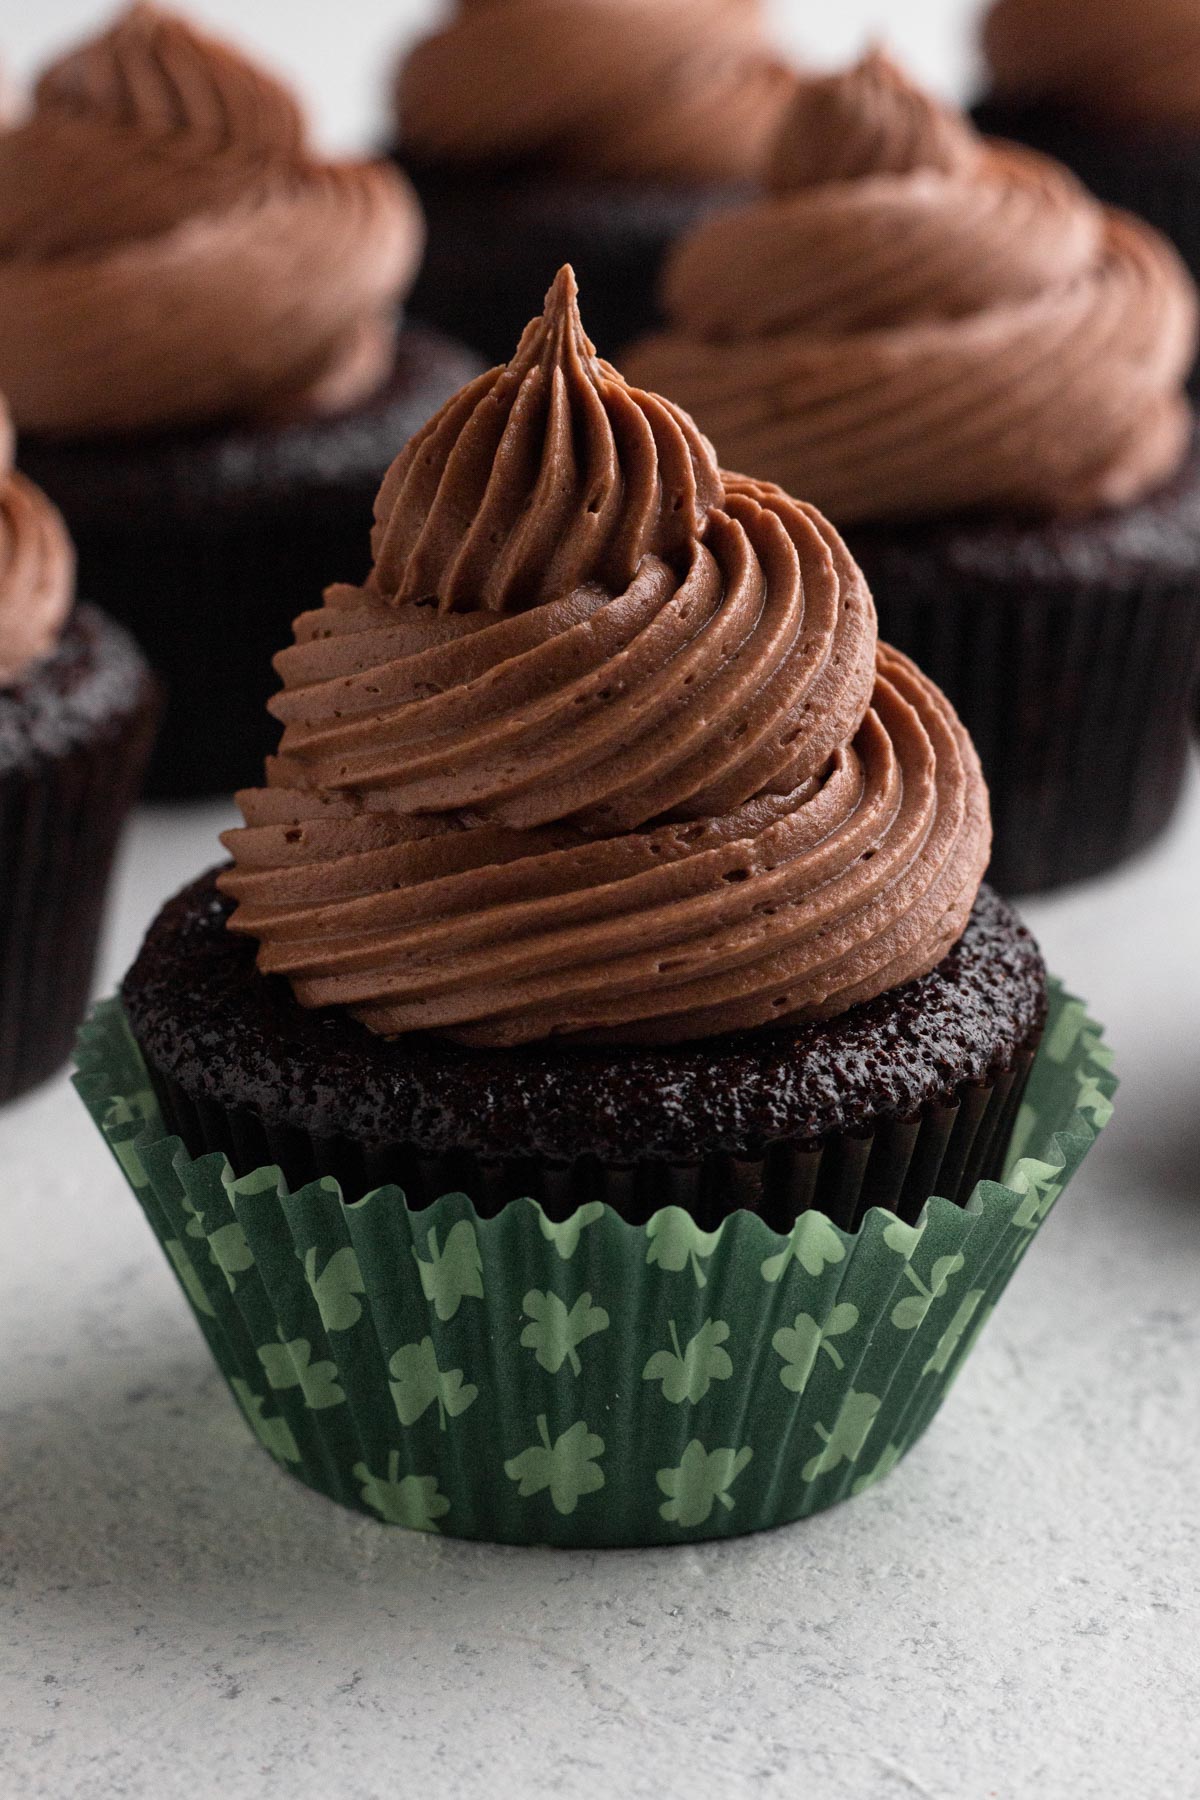 Chocolate frosting swirled on top of a chocolate cupcake in a green cupcake paper with shamrocks.